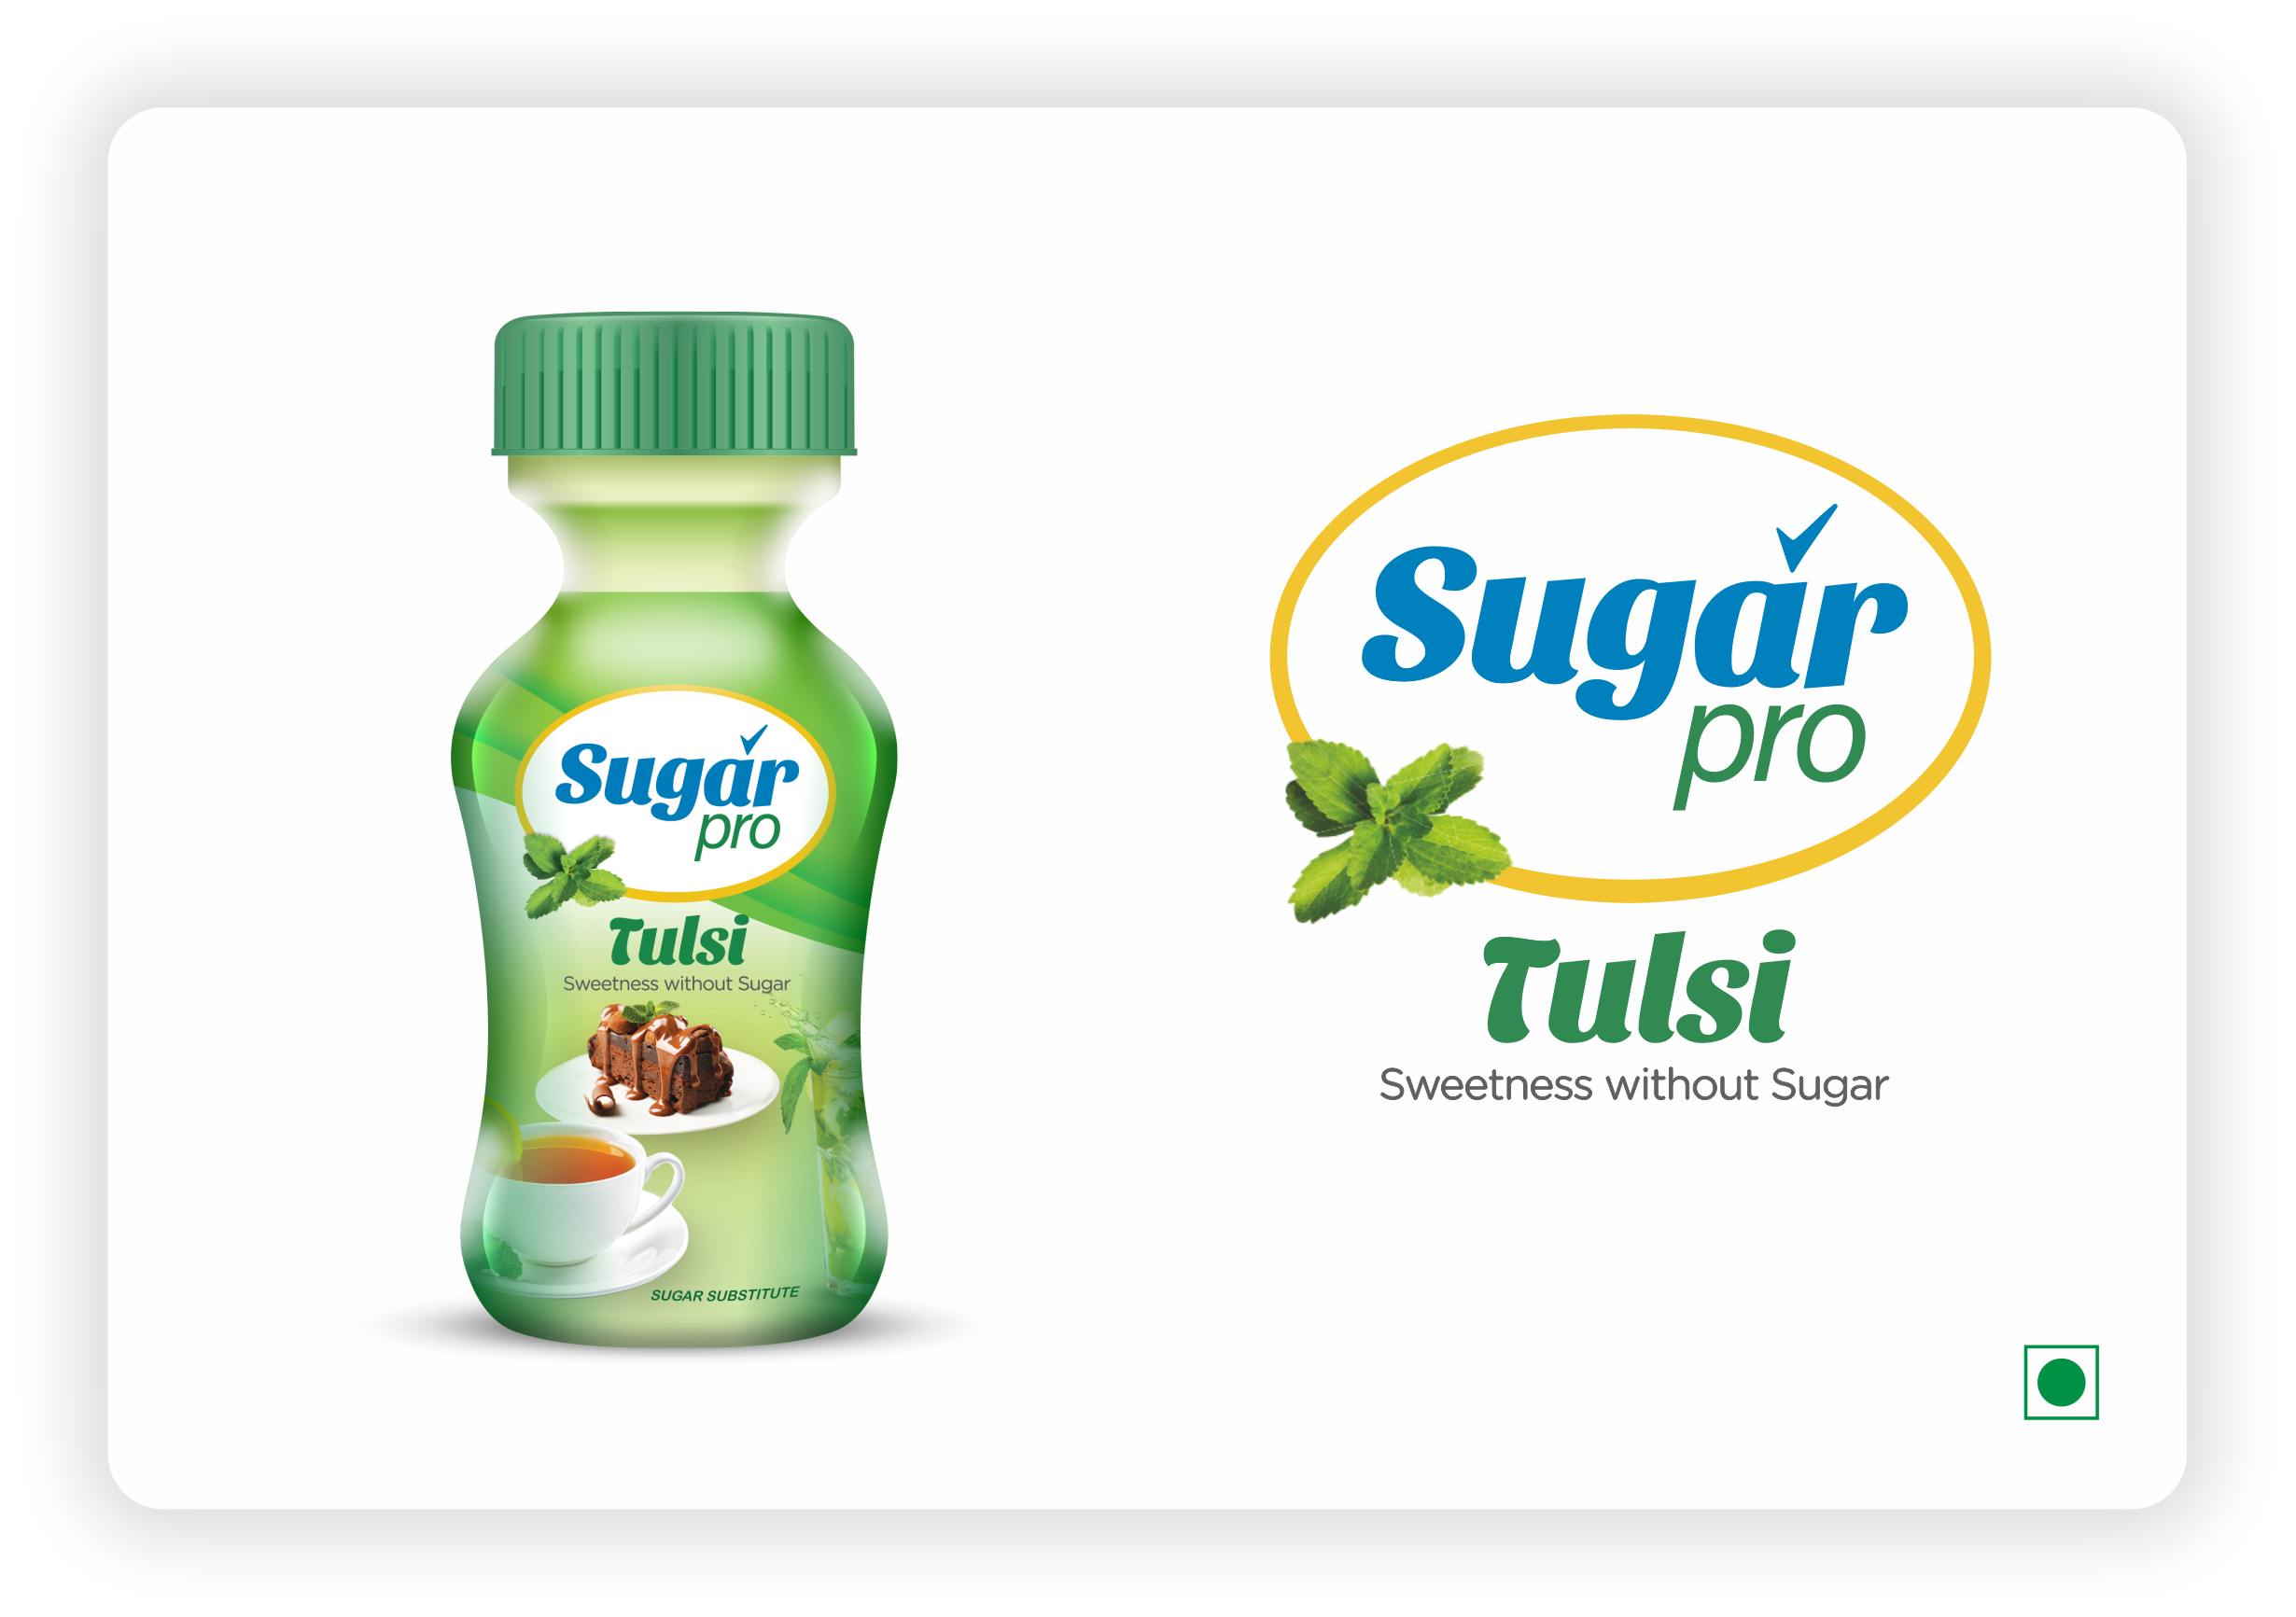 MB Care Our Product Page Sugar Tulsi Pro